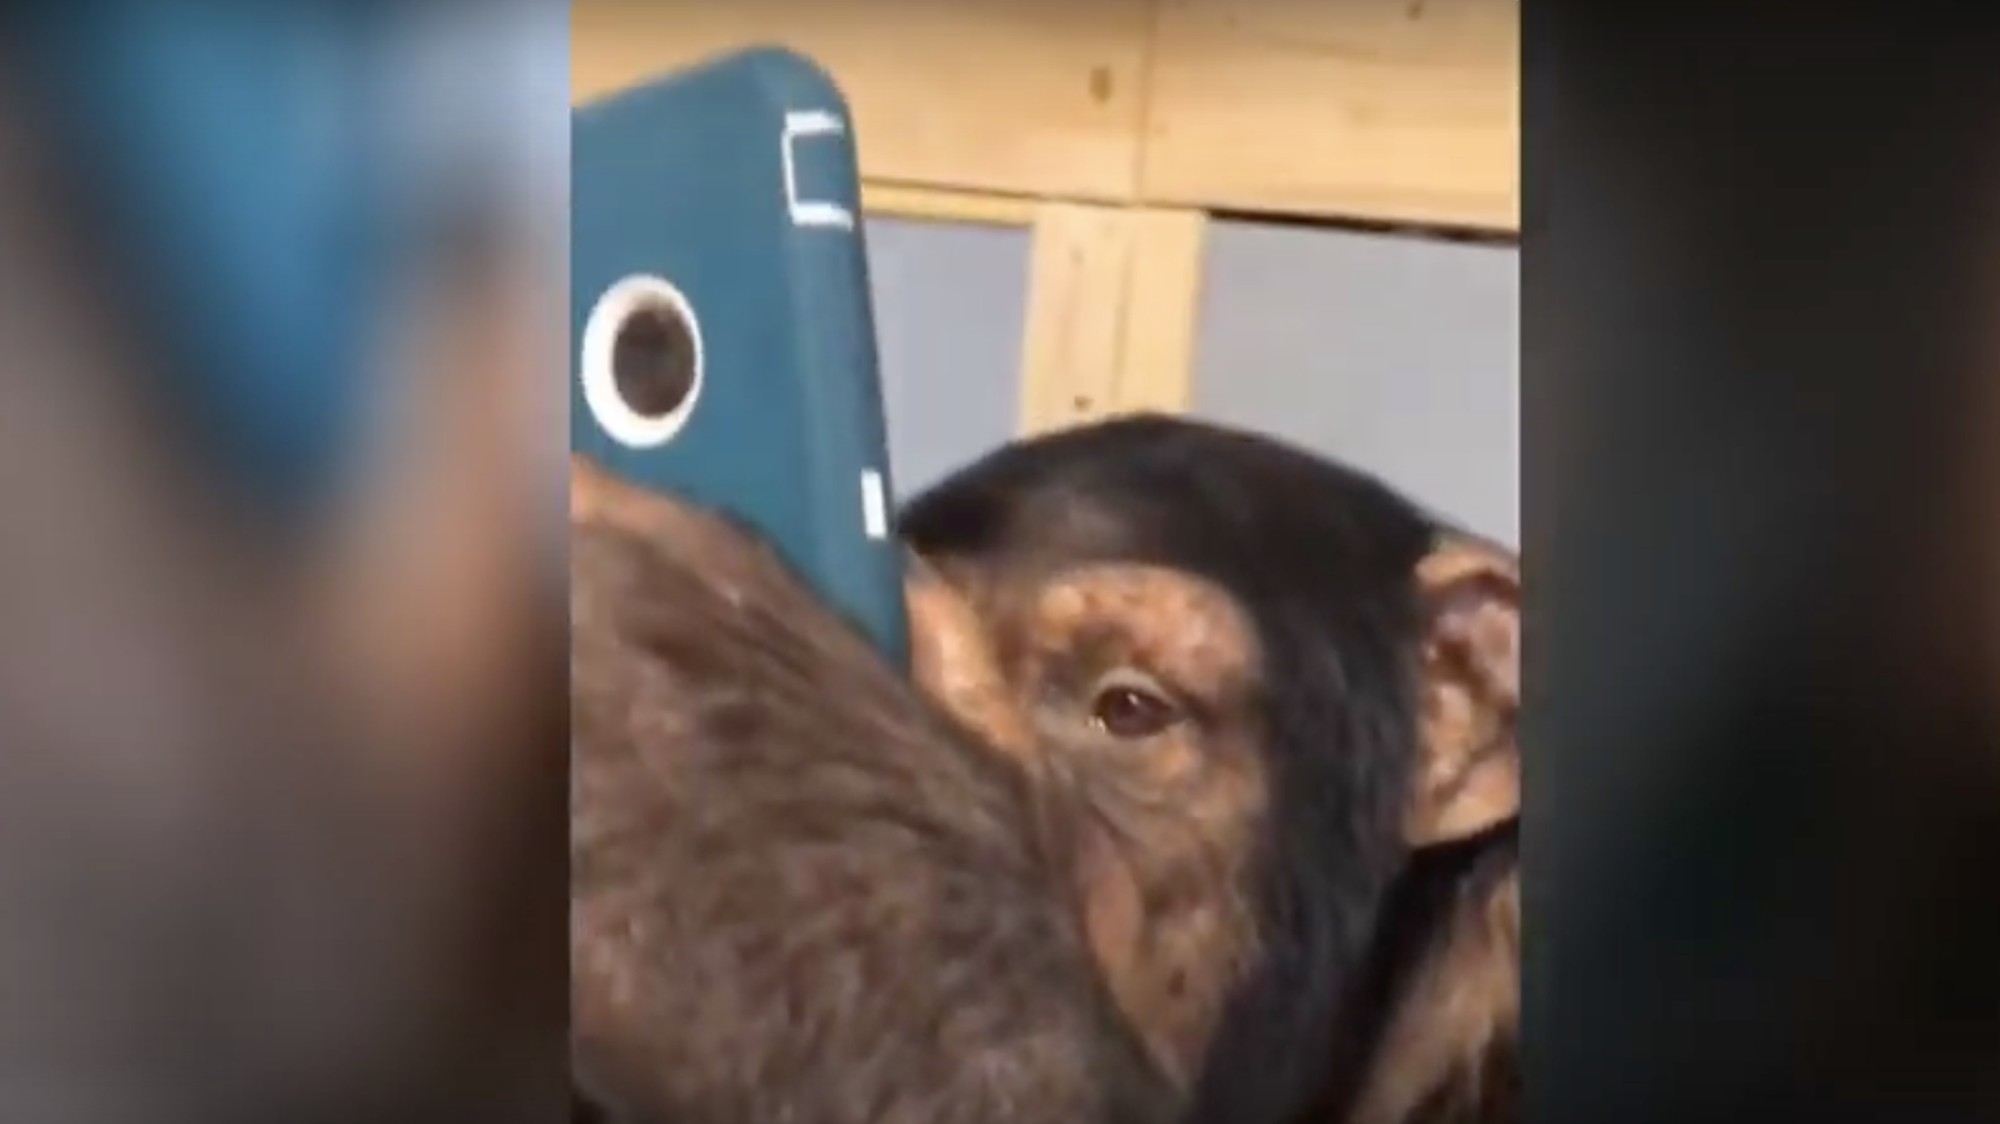 Chimpanzee Sex - That Viral Video of a Chimp Scrolling Instagram Is Bad ...